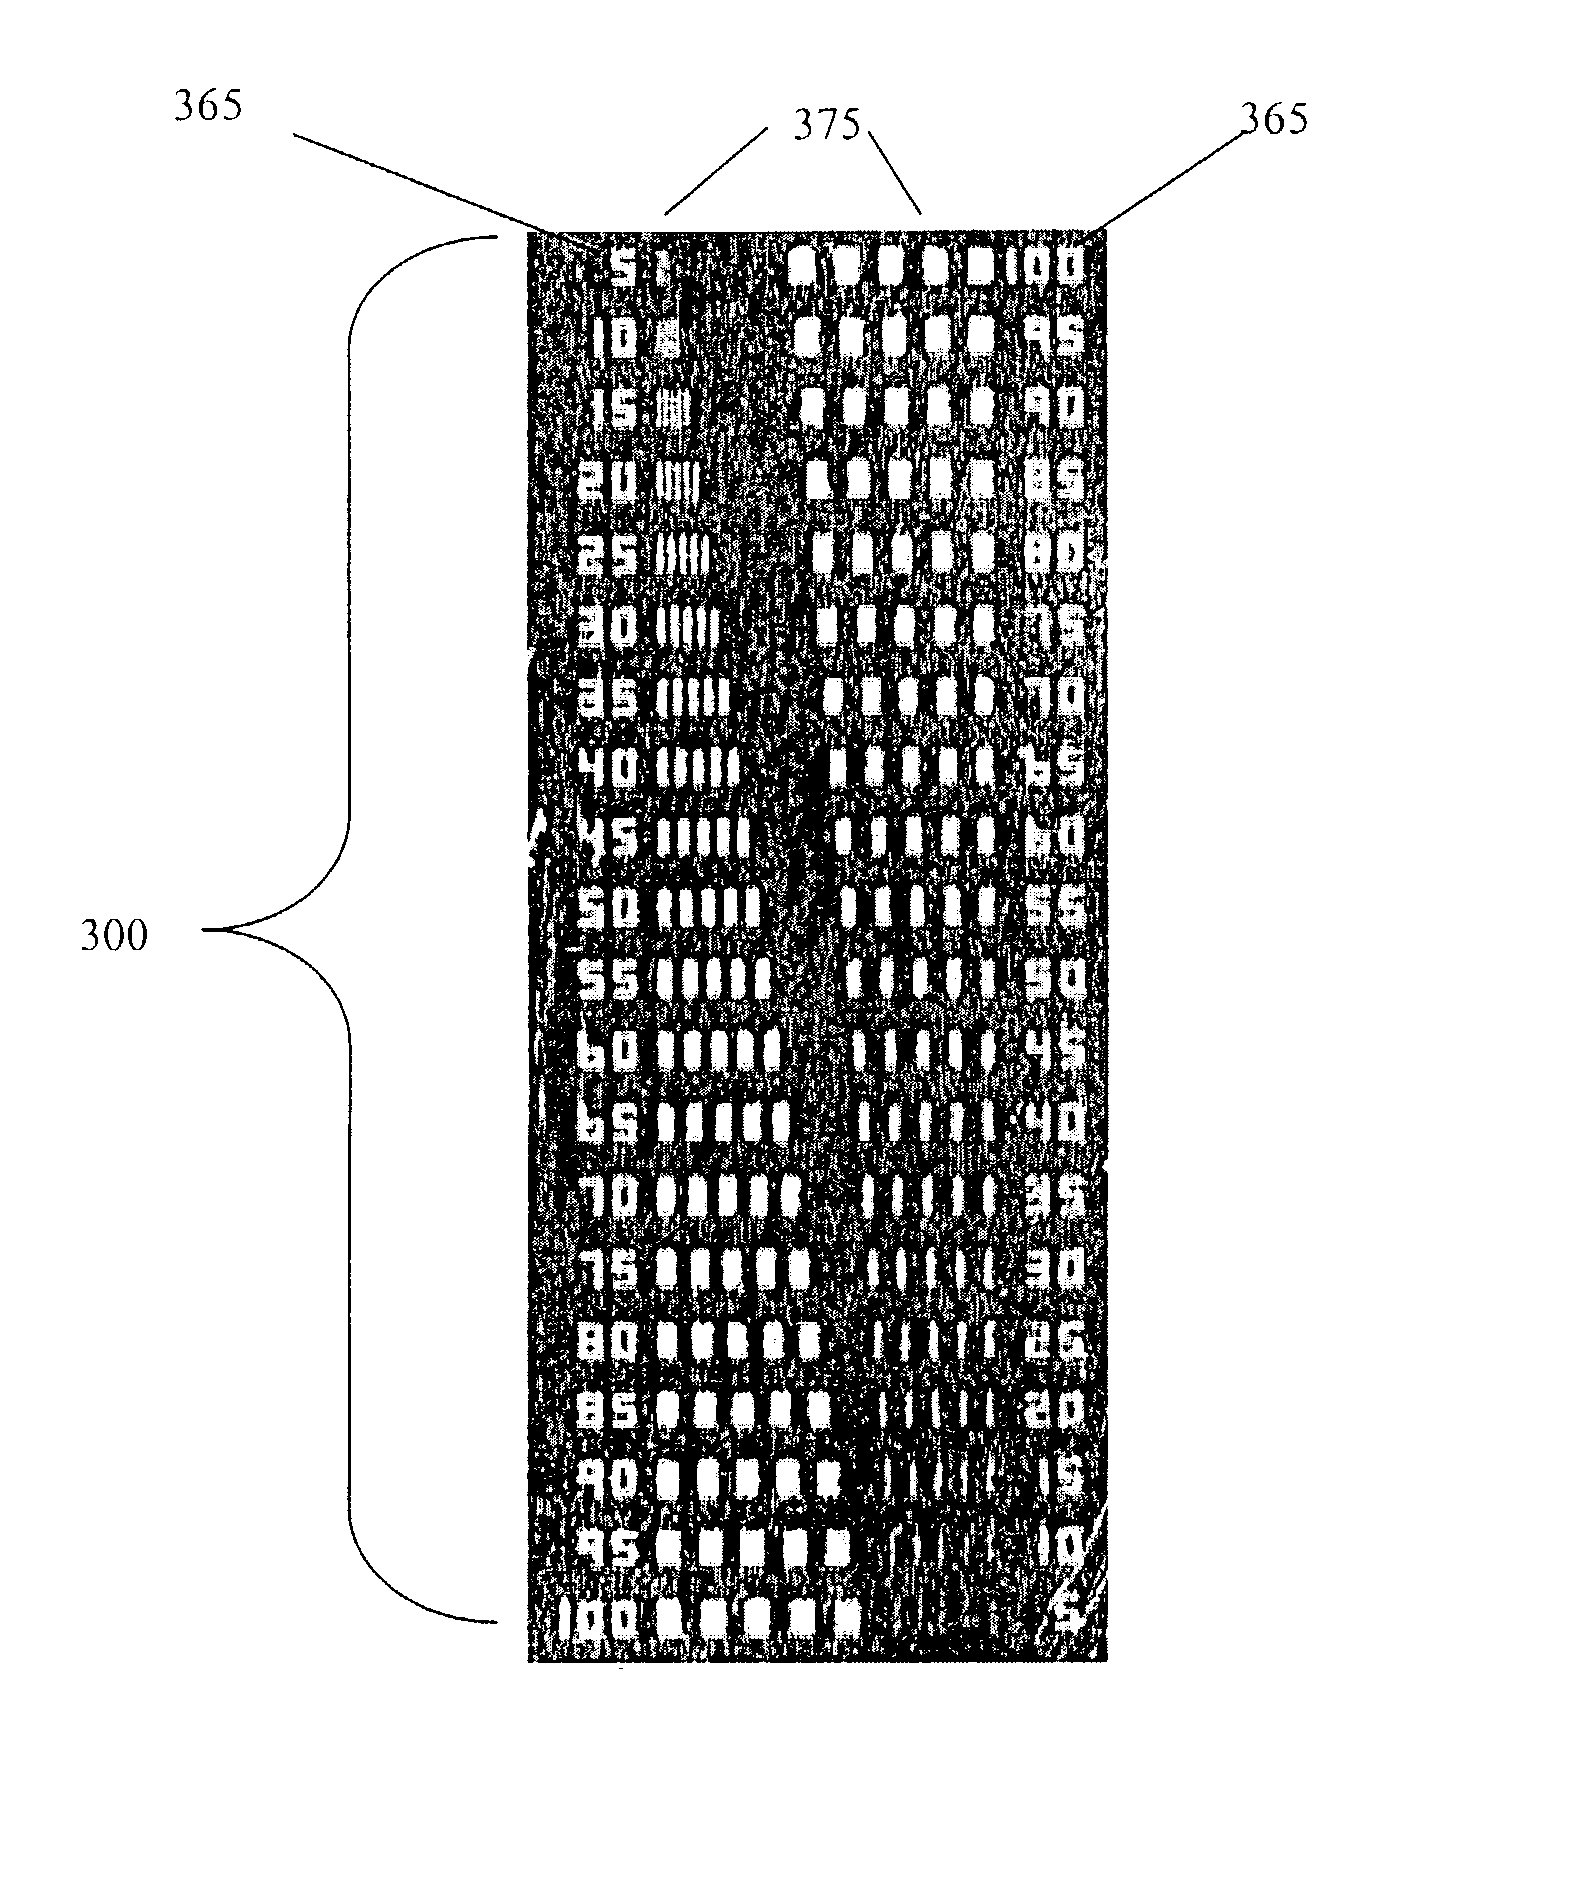 Patterned supports for testing, evaluating and calibrating detection devices